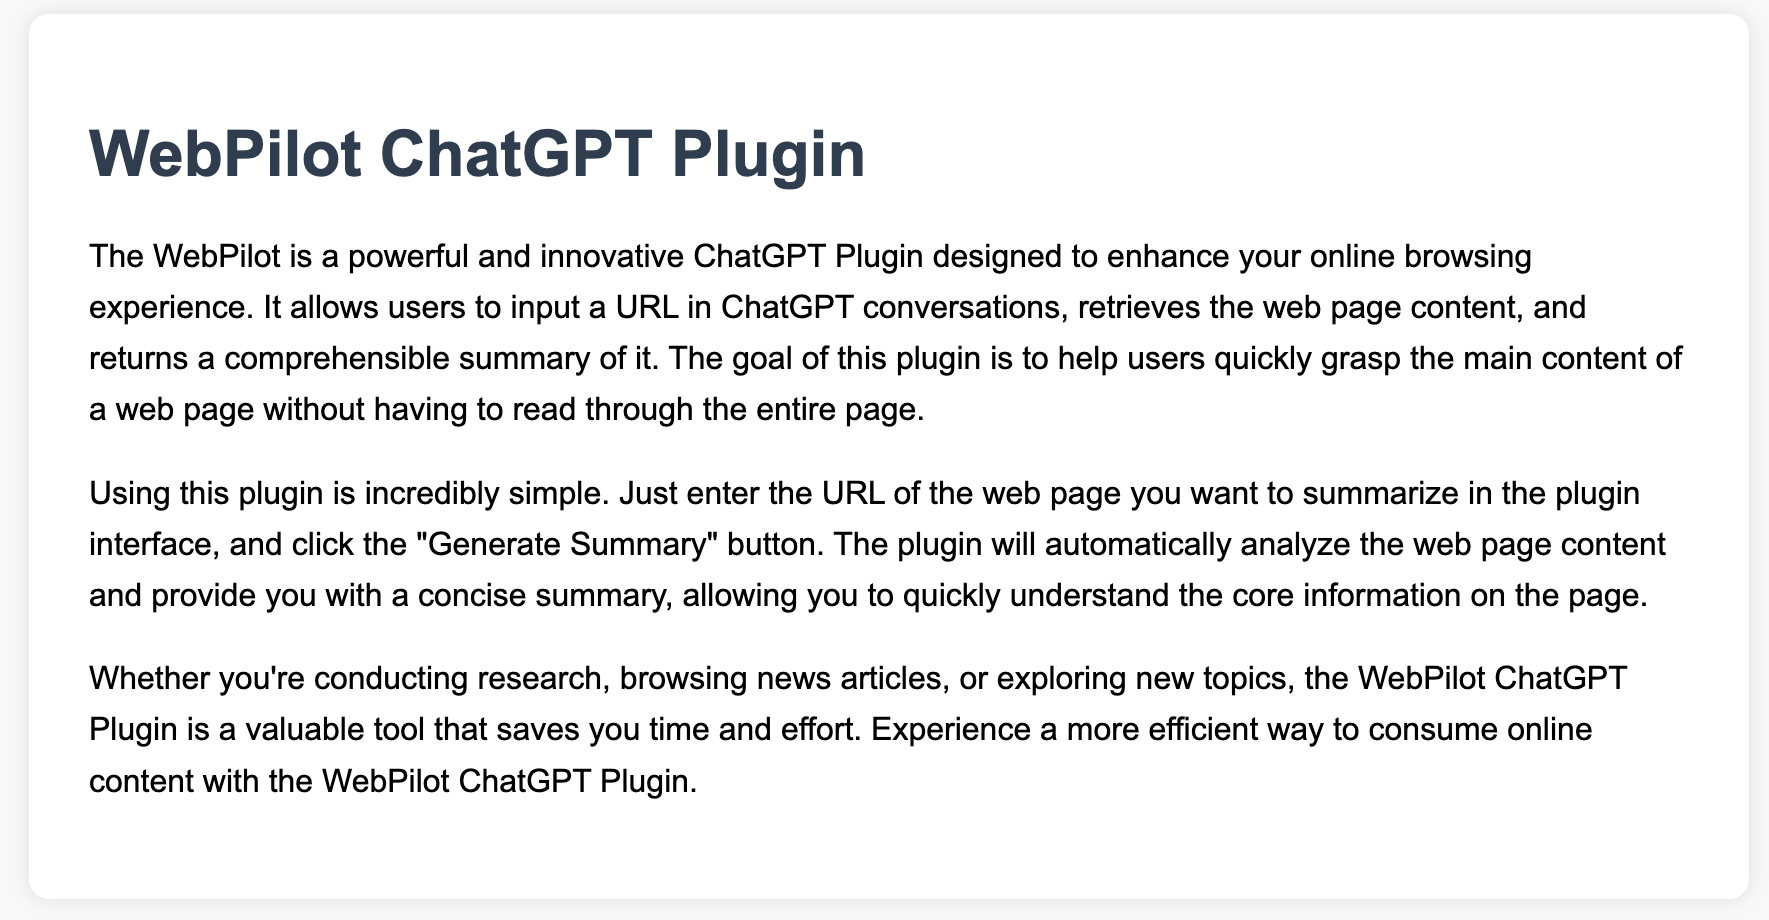 developer info for chatgpt plugin link 64cade9932cc1 sej - Link Reader Disappears From ChatGPT Plugin Store